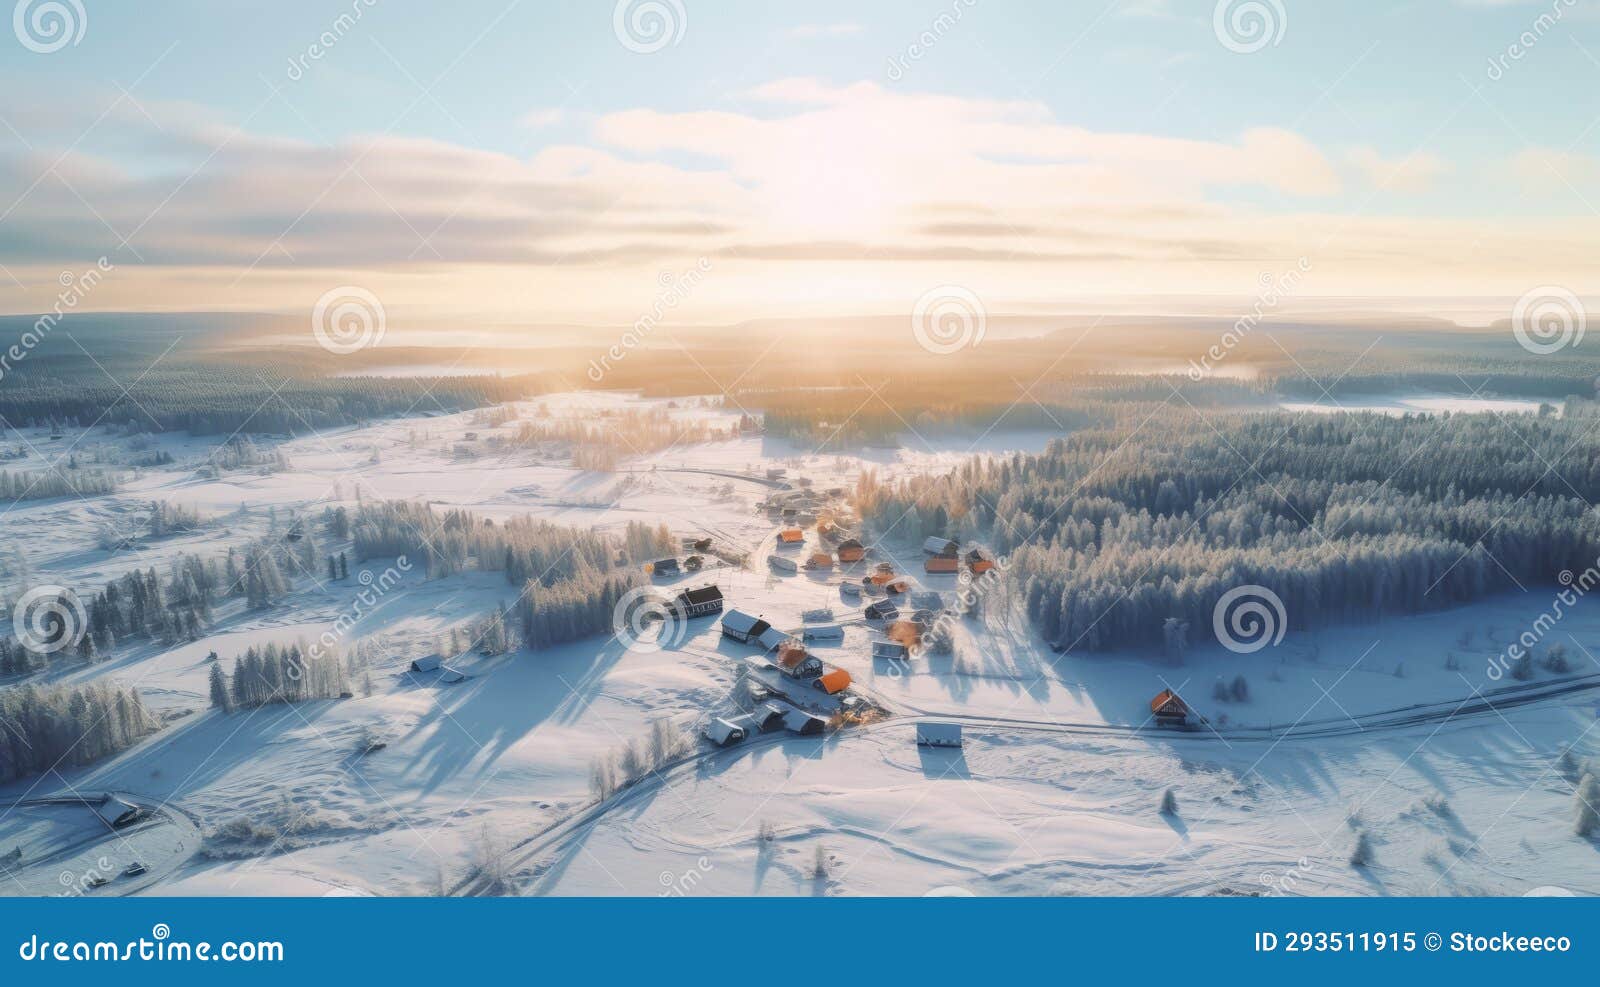 dreamy aerial view of snowy village in golden light